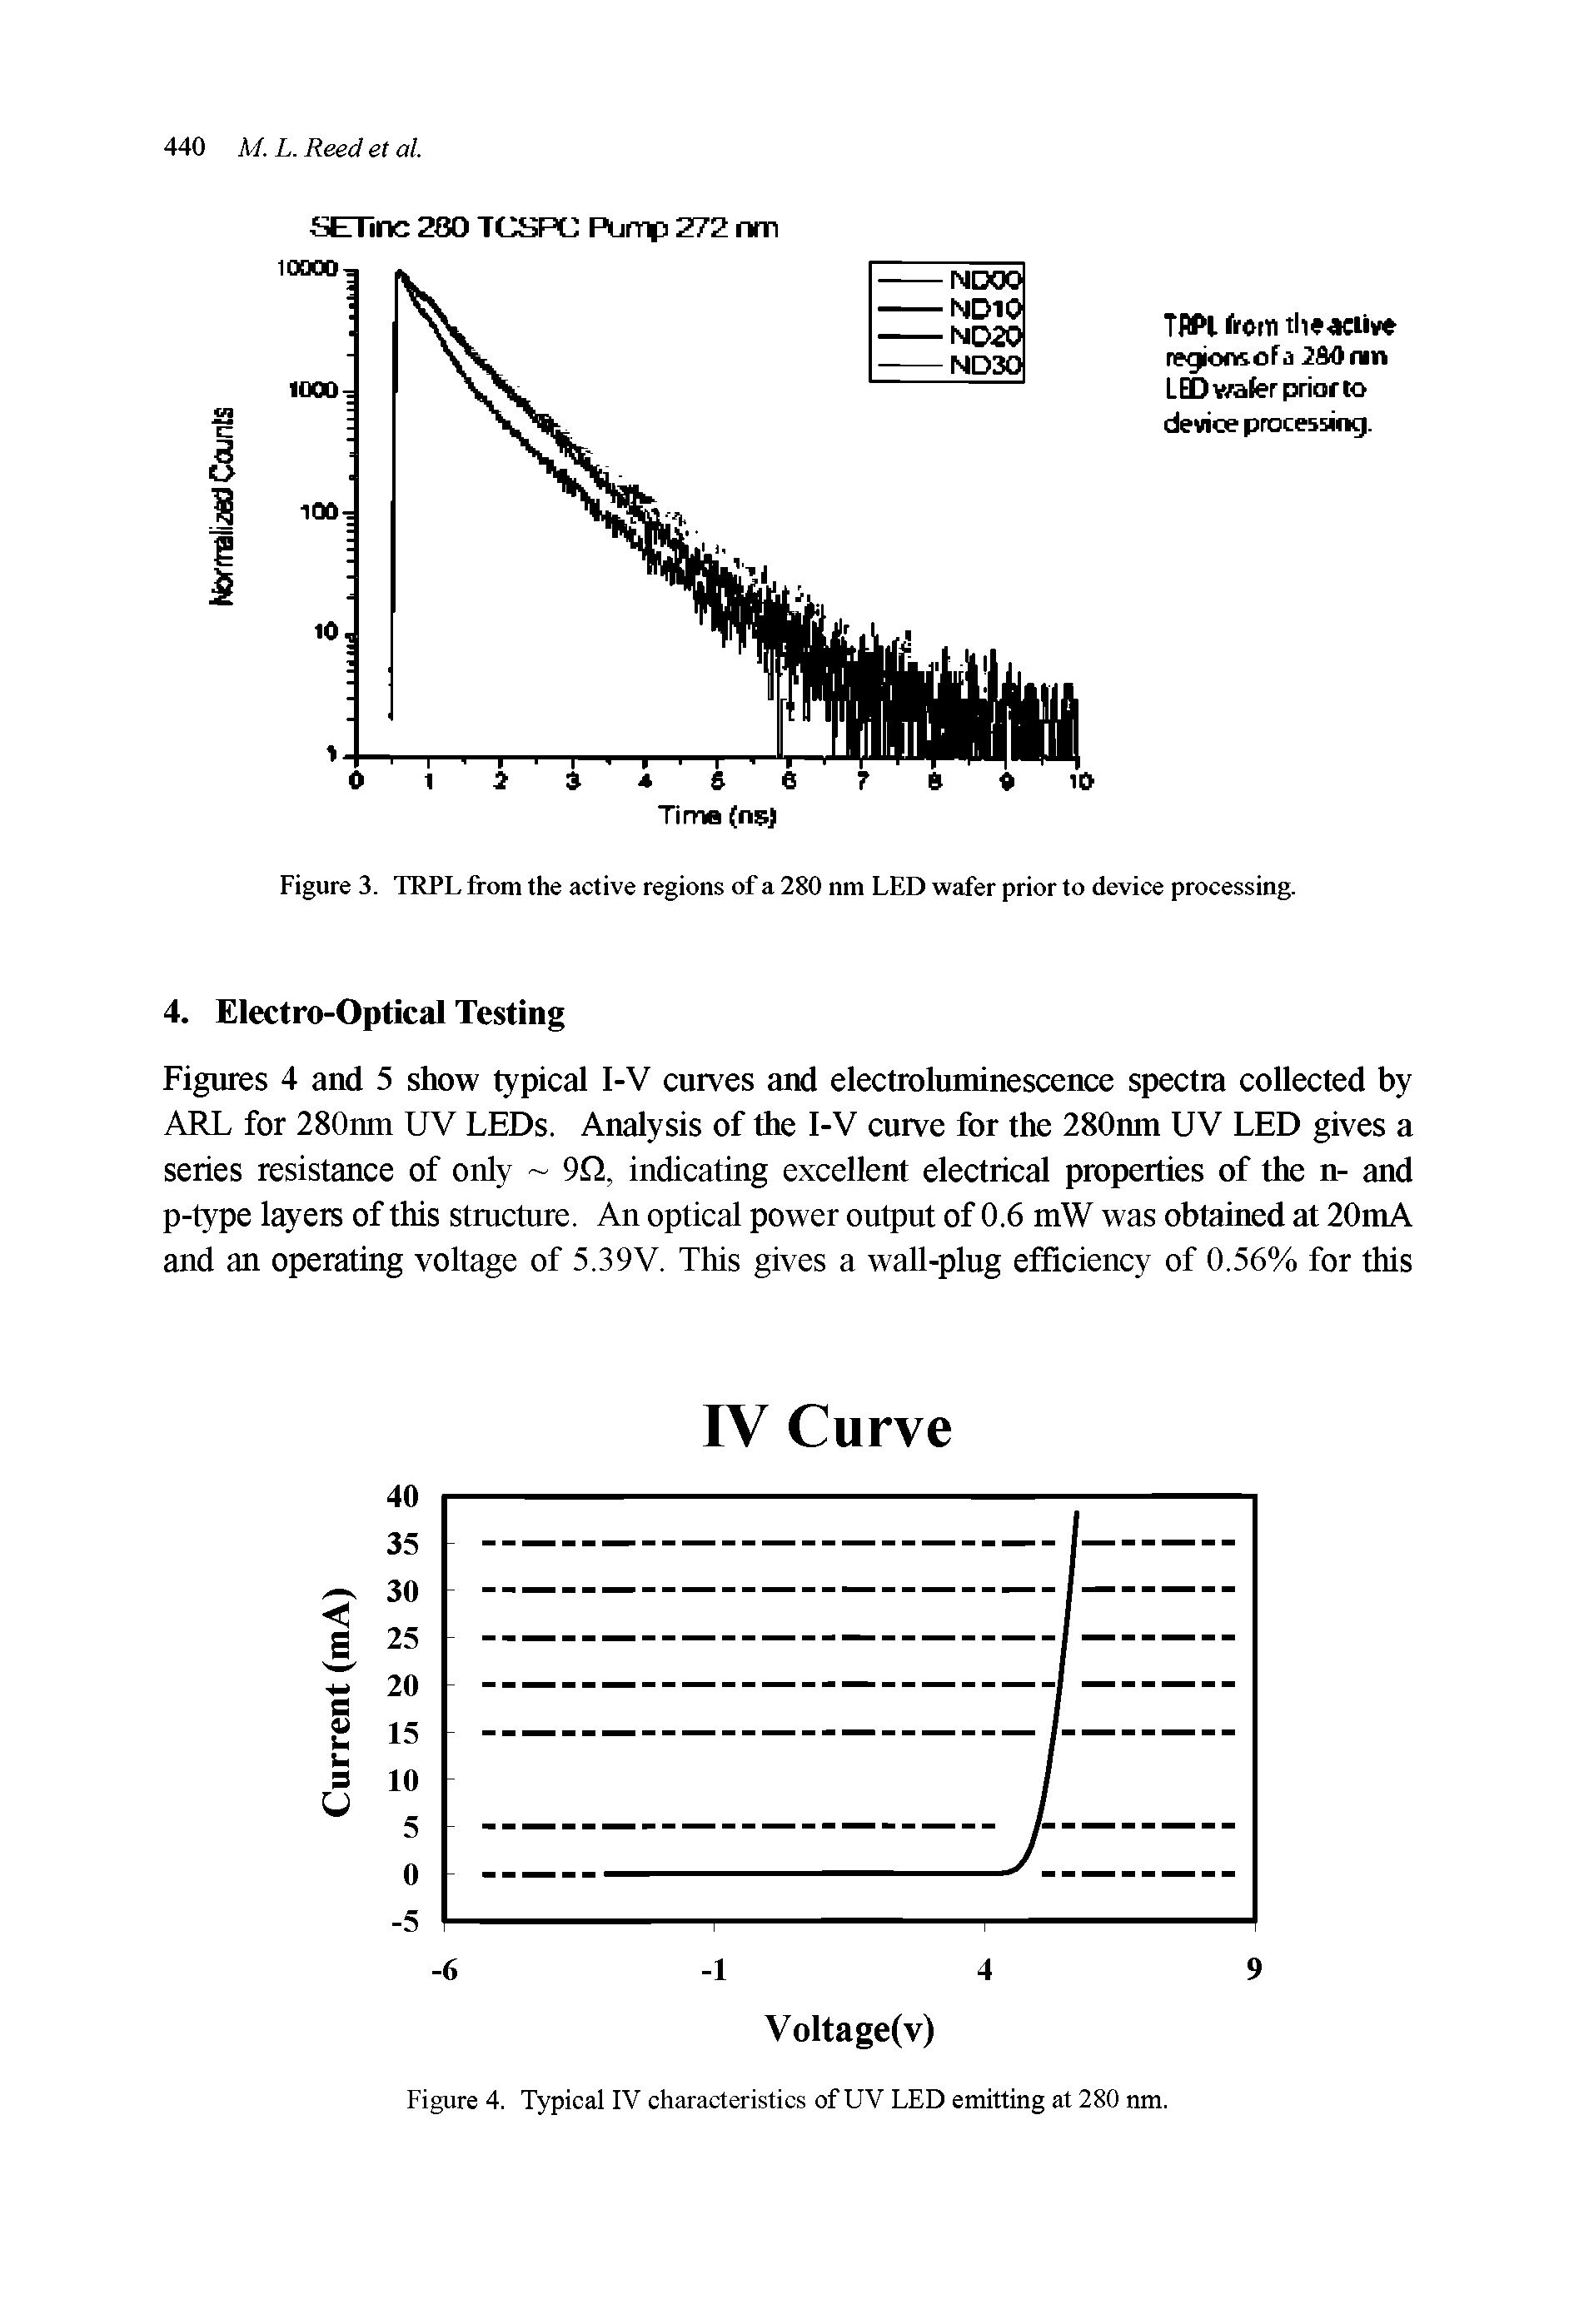 Figures 4 and 5 show typical I-V curves and electroluminescence spectra collected by ARL for 280nm UV LEDs. Analysis of the 1-V curve for the 280nm UV LED gives a series resistance of only 9D, indicating excellent electrical properties of the n- and p-type layers of this structure. An optical power output of 0.6 mW was obtained at 20mA and an operating voltage of 5.39V. This gives a wall-plug efficiency of 0.56% for this...